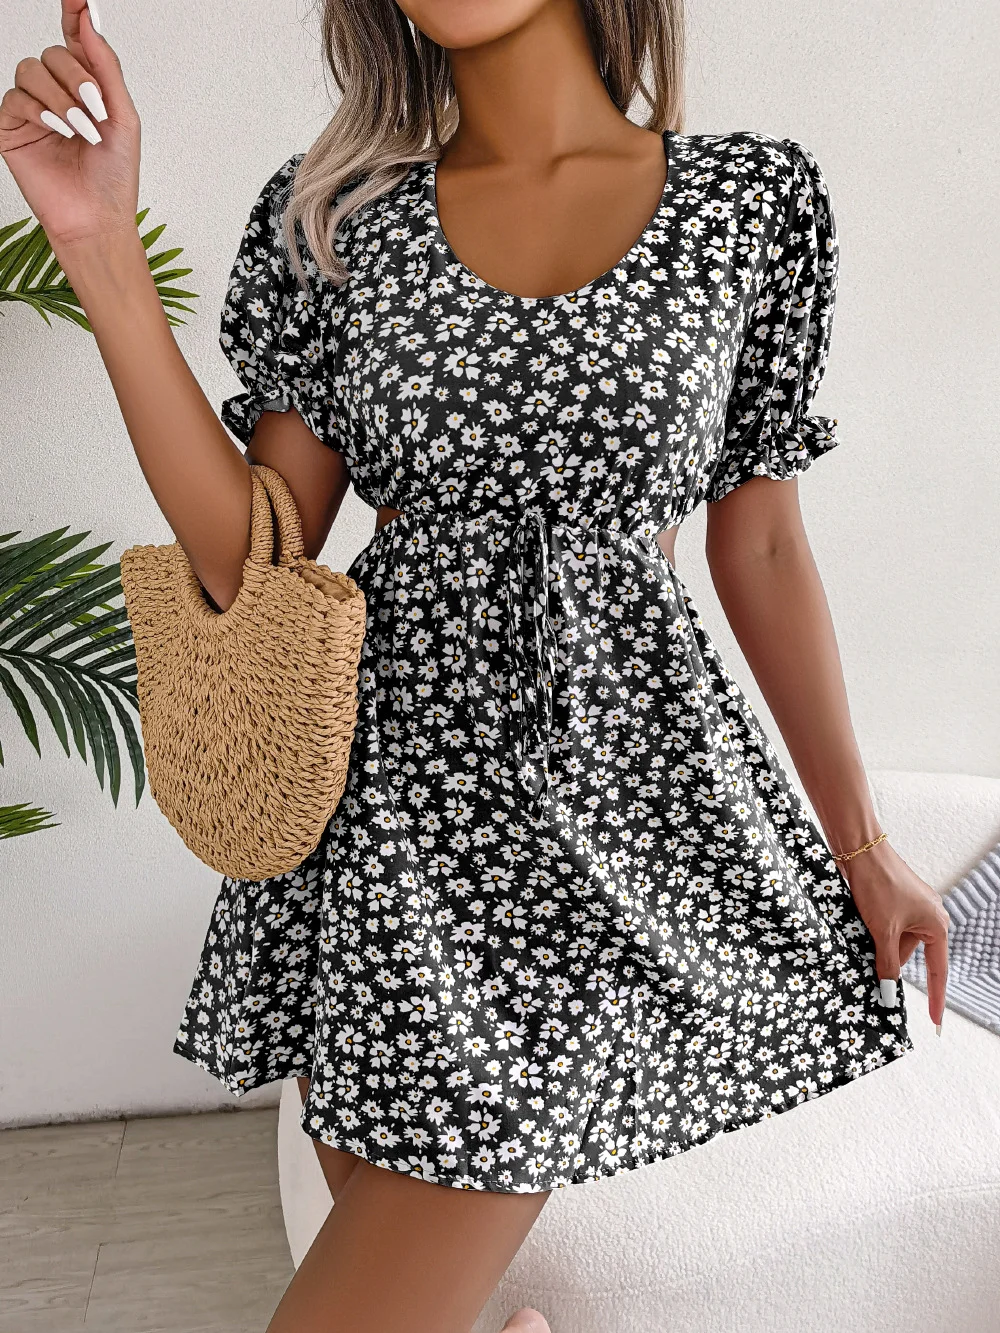 Elegant Floral Print Dress Women Summer Dresses New Casual Hollow Out Lace-up V-neck Short Puff Sleeve Mini Dress